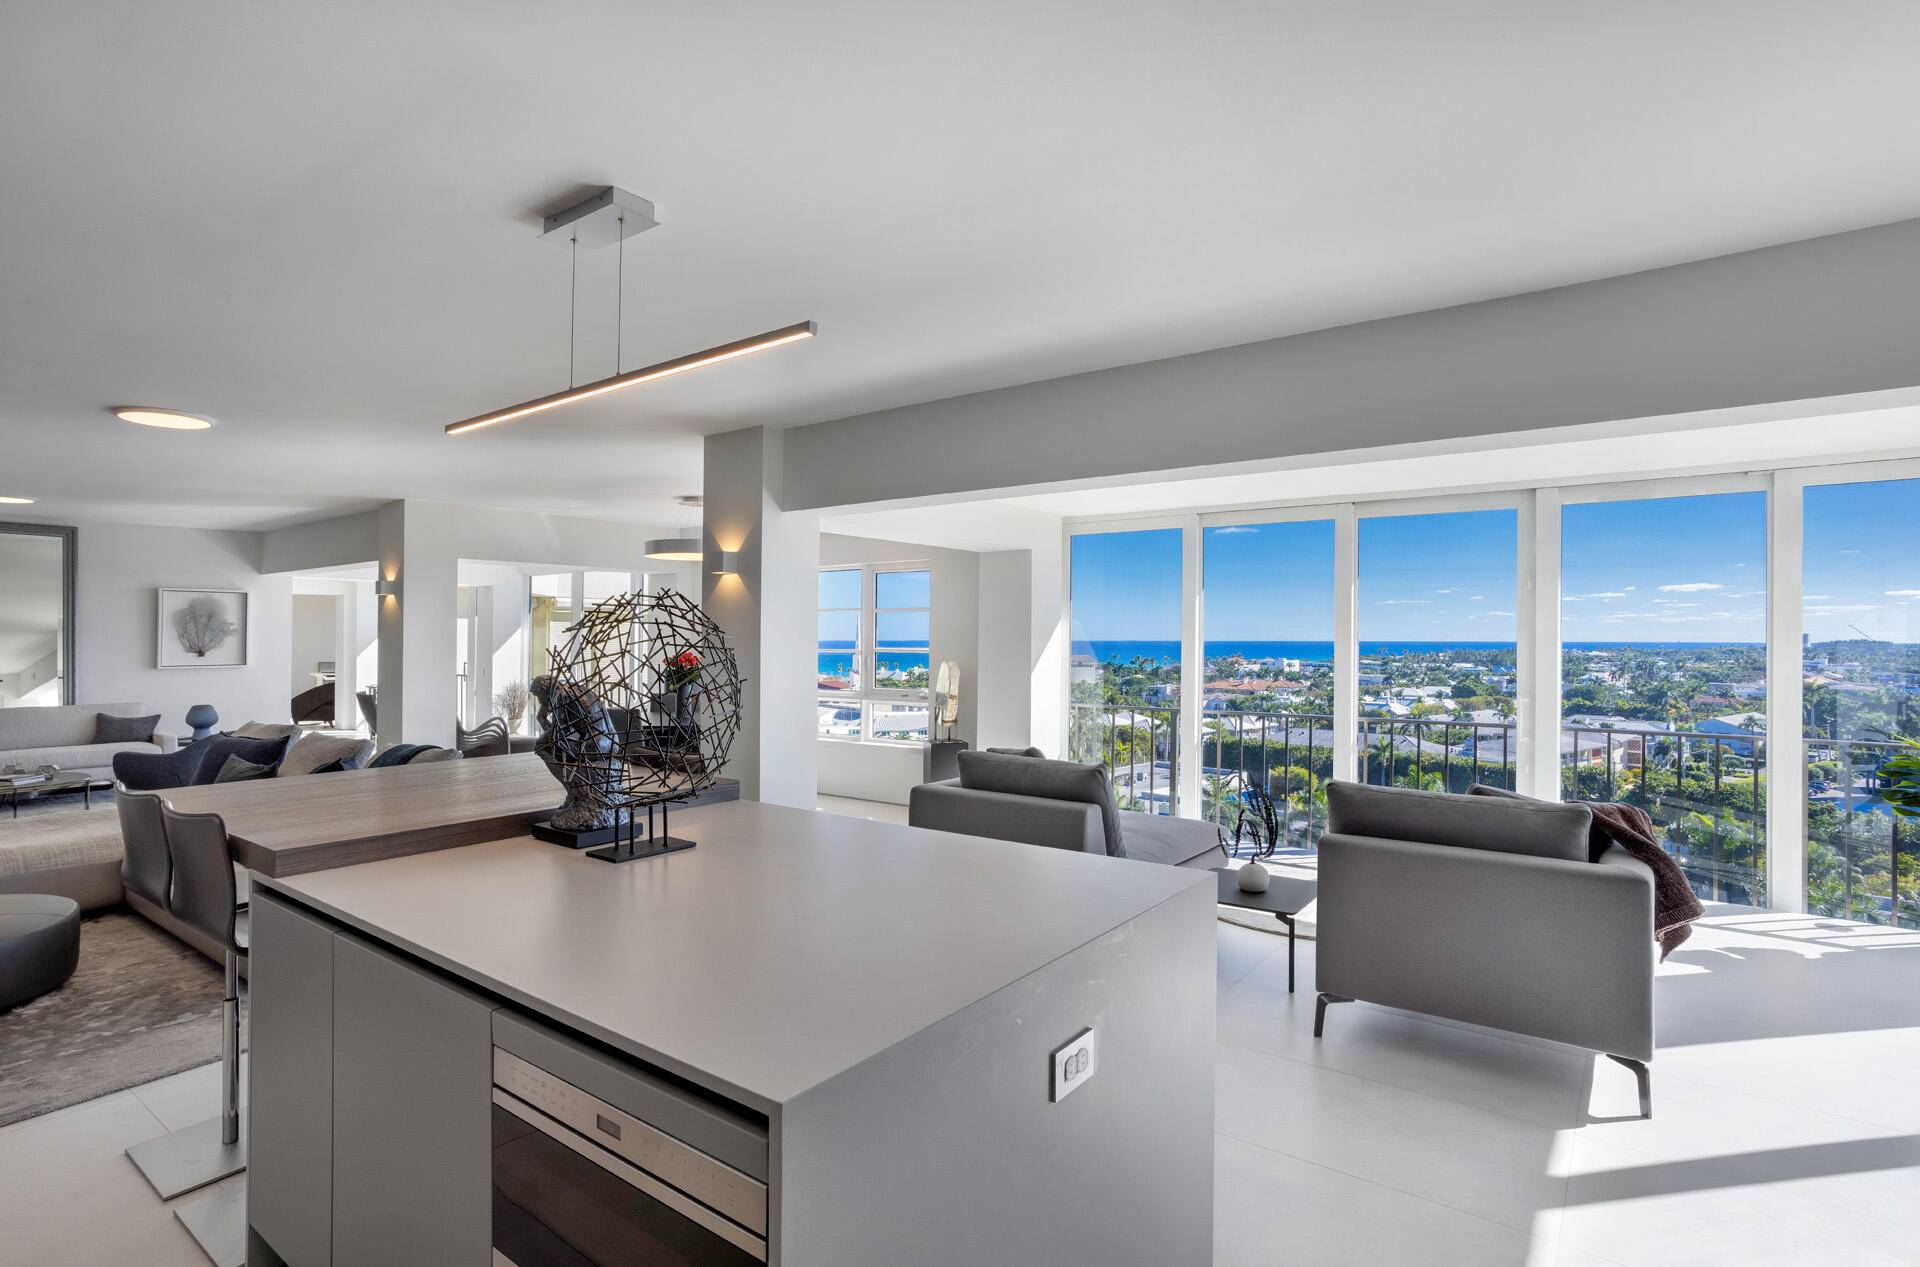 Two blocks from the ocean on vibrant Atlantic Avenue, Delray Beach, this totally renovated contemporary penthouse offers awe inspiring ocean, Intracoastal and city views.